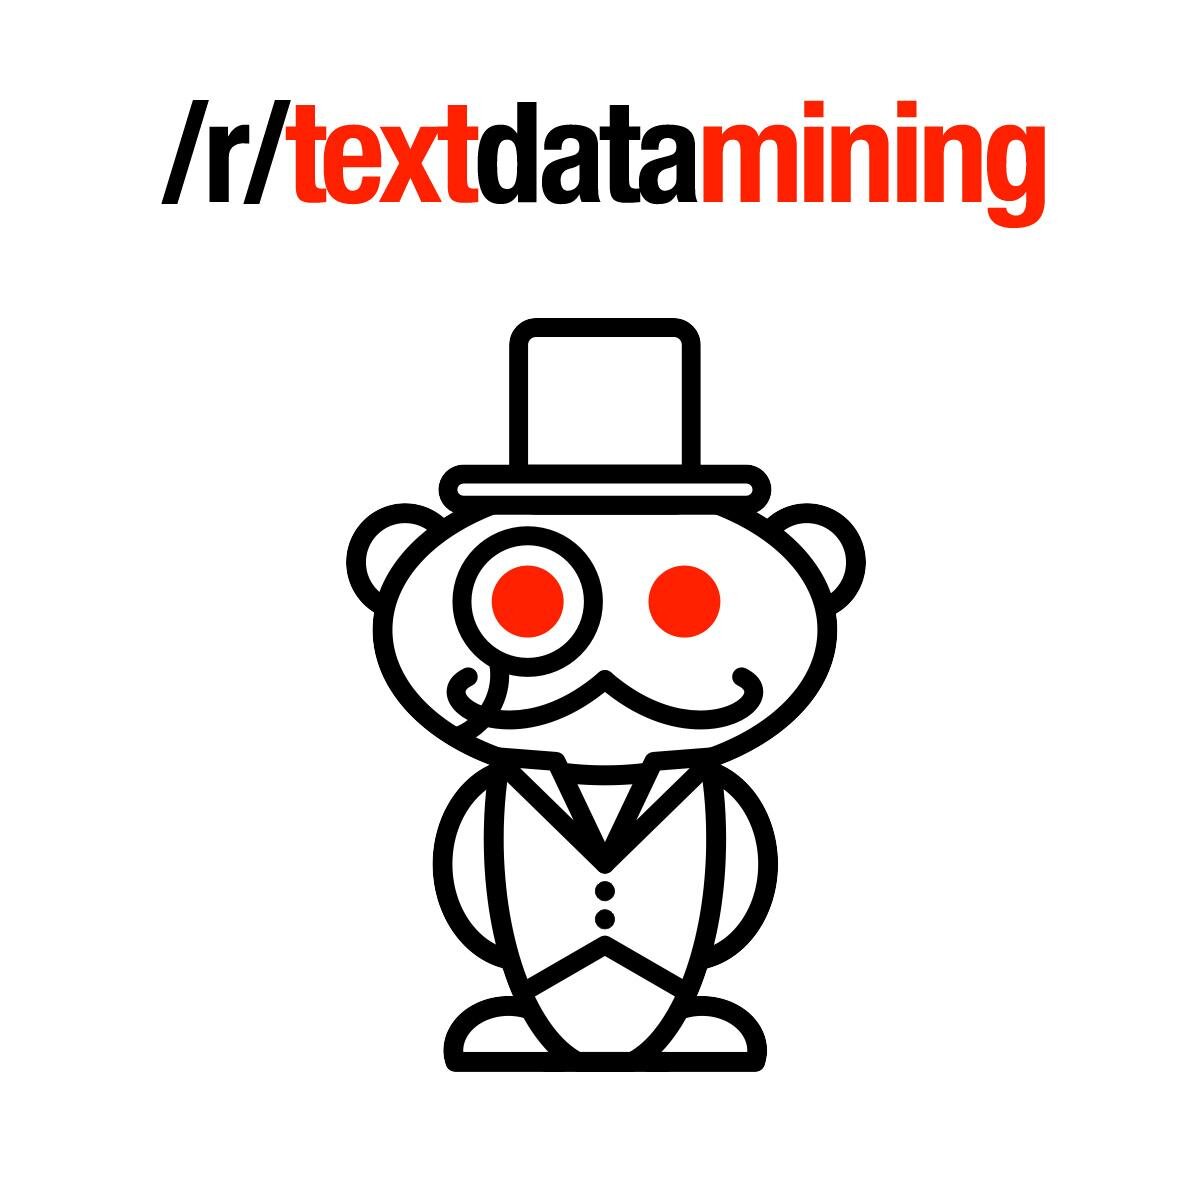 We share news, discussions, videos, papers, and tutorials related to Machine Learning and NLP. Subscribe on Reddit!